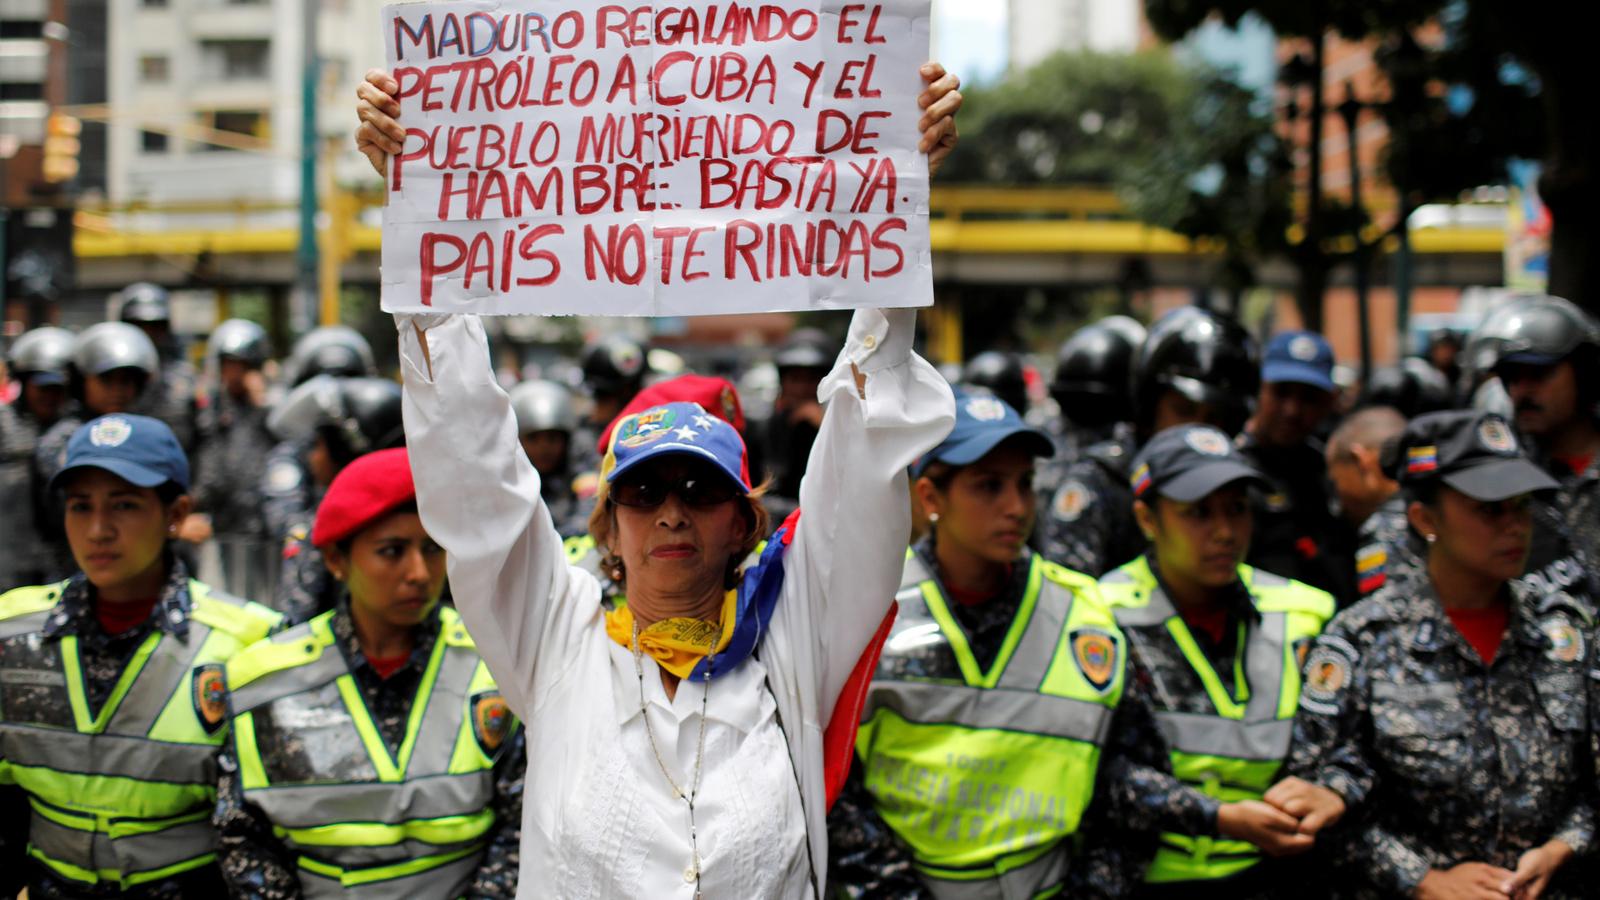 A woman holds a protest sign in Spanish.